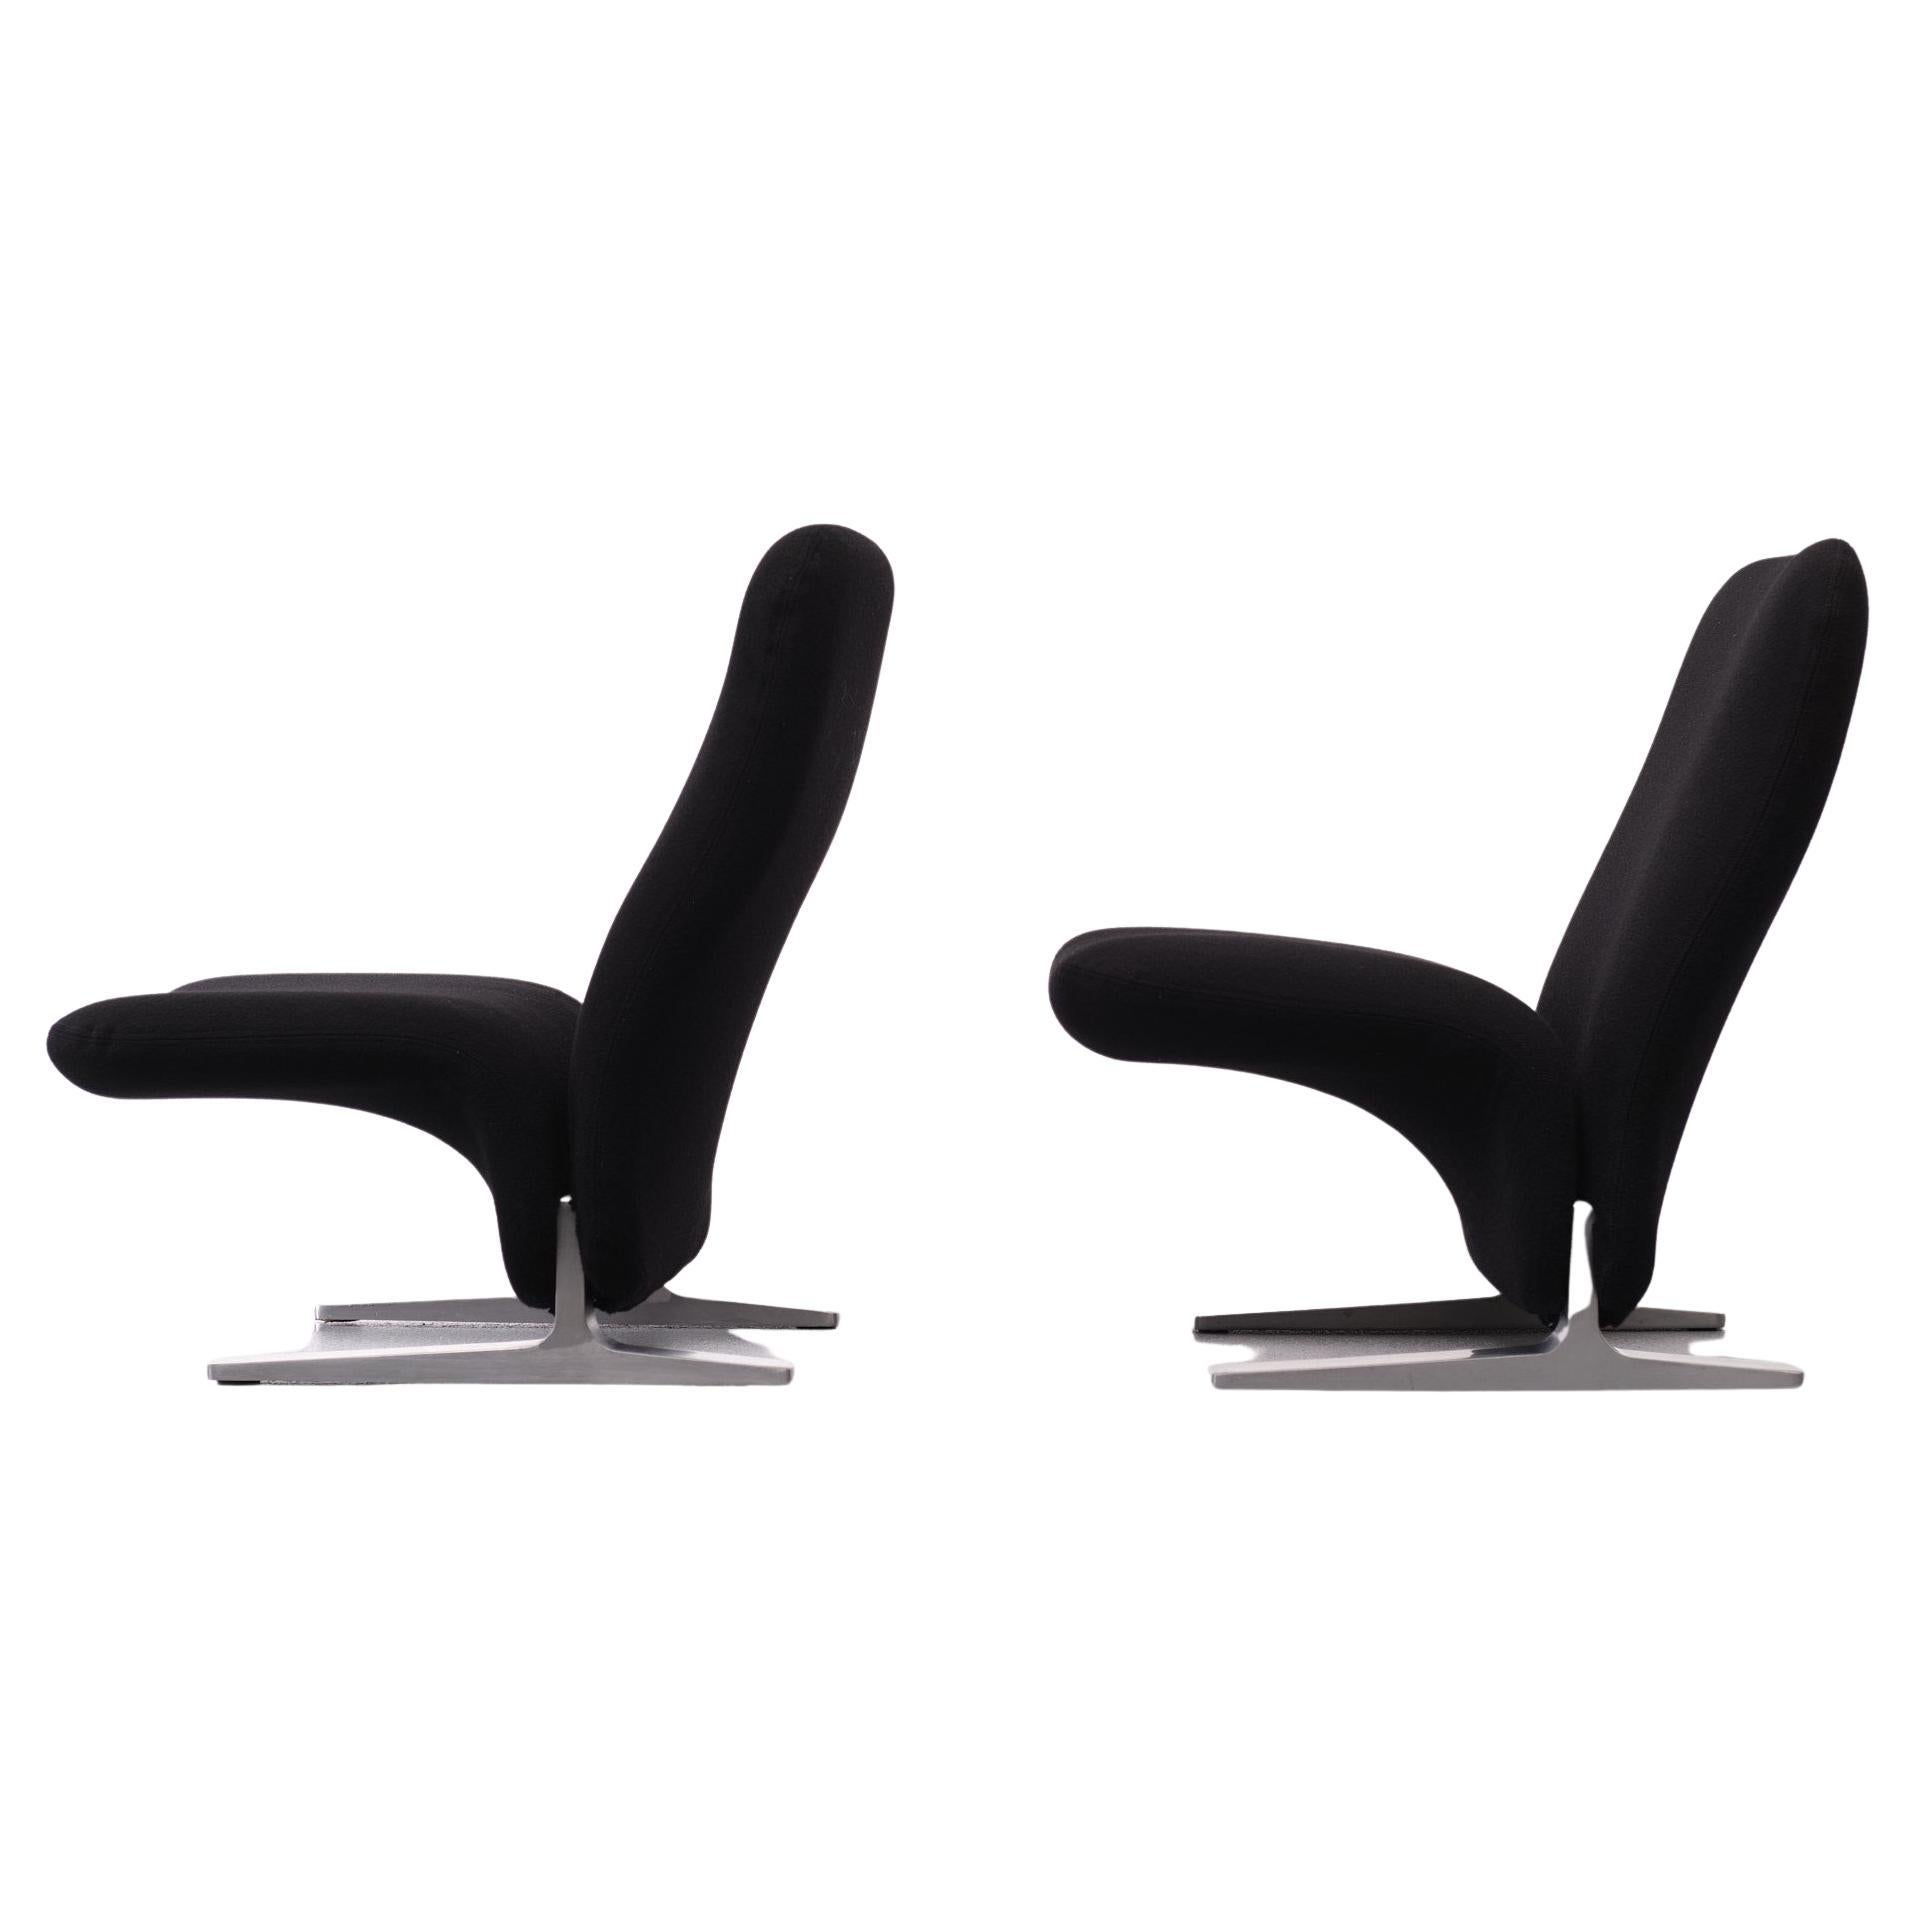 Concorde Lounge chairs designed by Pierre Paulin and made by Artifort. This chair was originally designed by Pierre Paulin for the waiting room of the French Concorde aircraft, after which the chair was named. Both chairs have the beautiful new